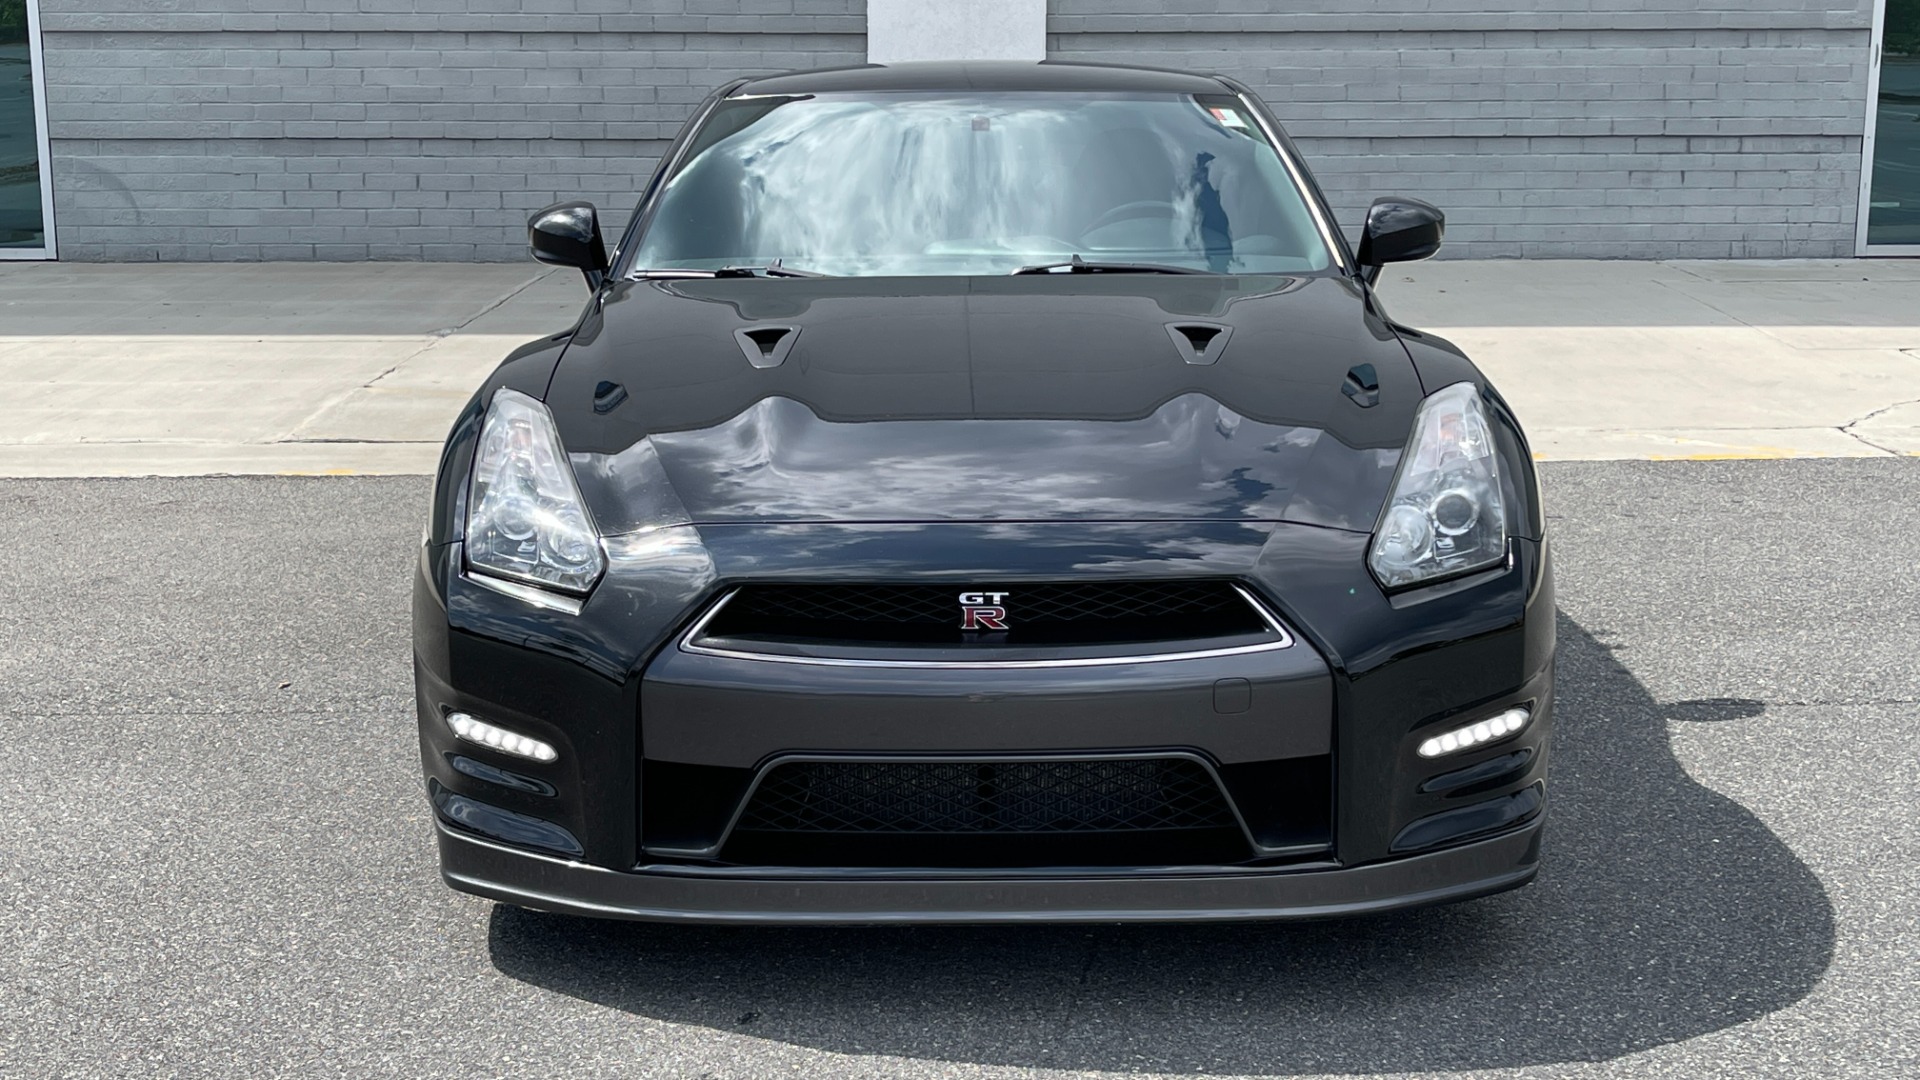 Used 2013 Nissan GT-R PREMIUM COUPE / 3.8L TWIN-TURBO / 6-SPD AUTO / COLD WTHR PKG / CAMERA for sale Sold at Formula Imports in Charlotte NC 28227 11